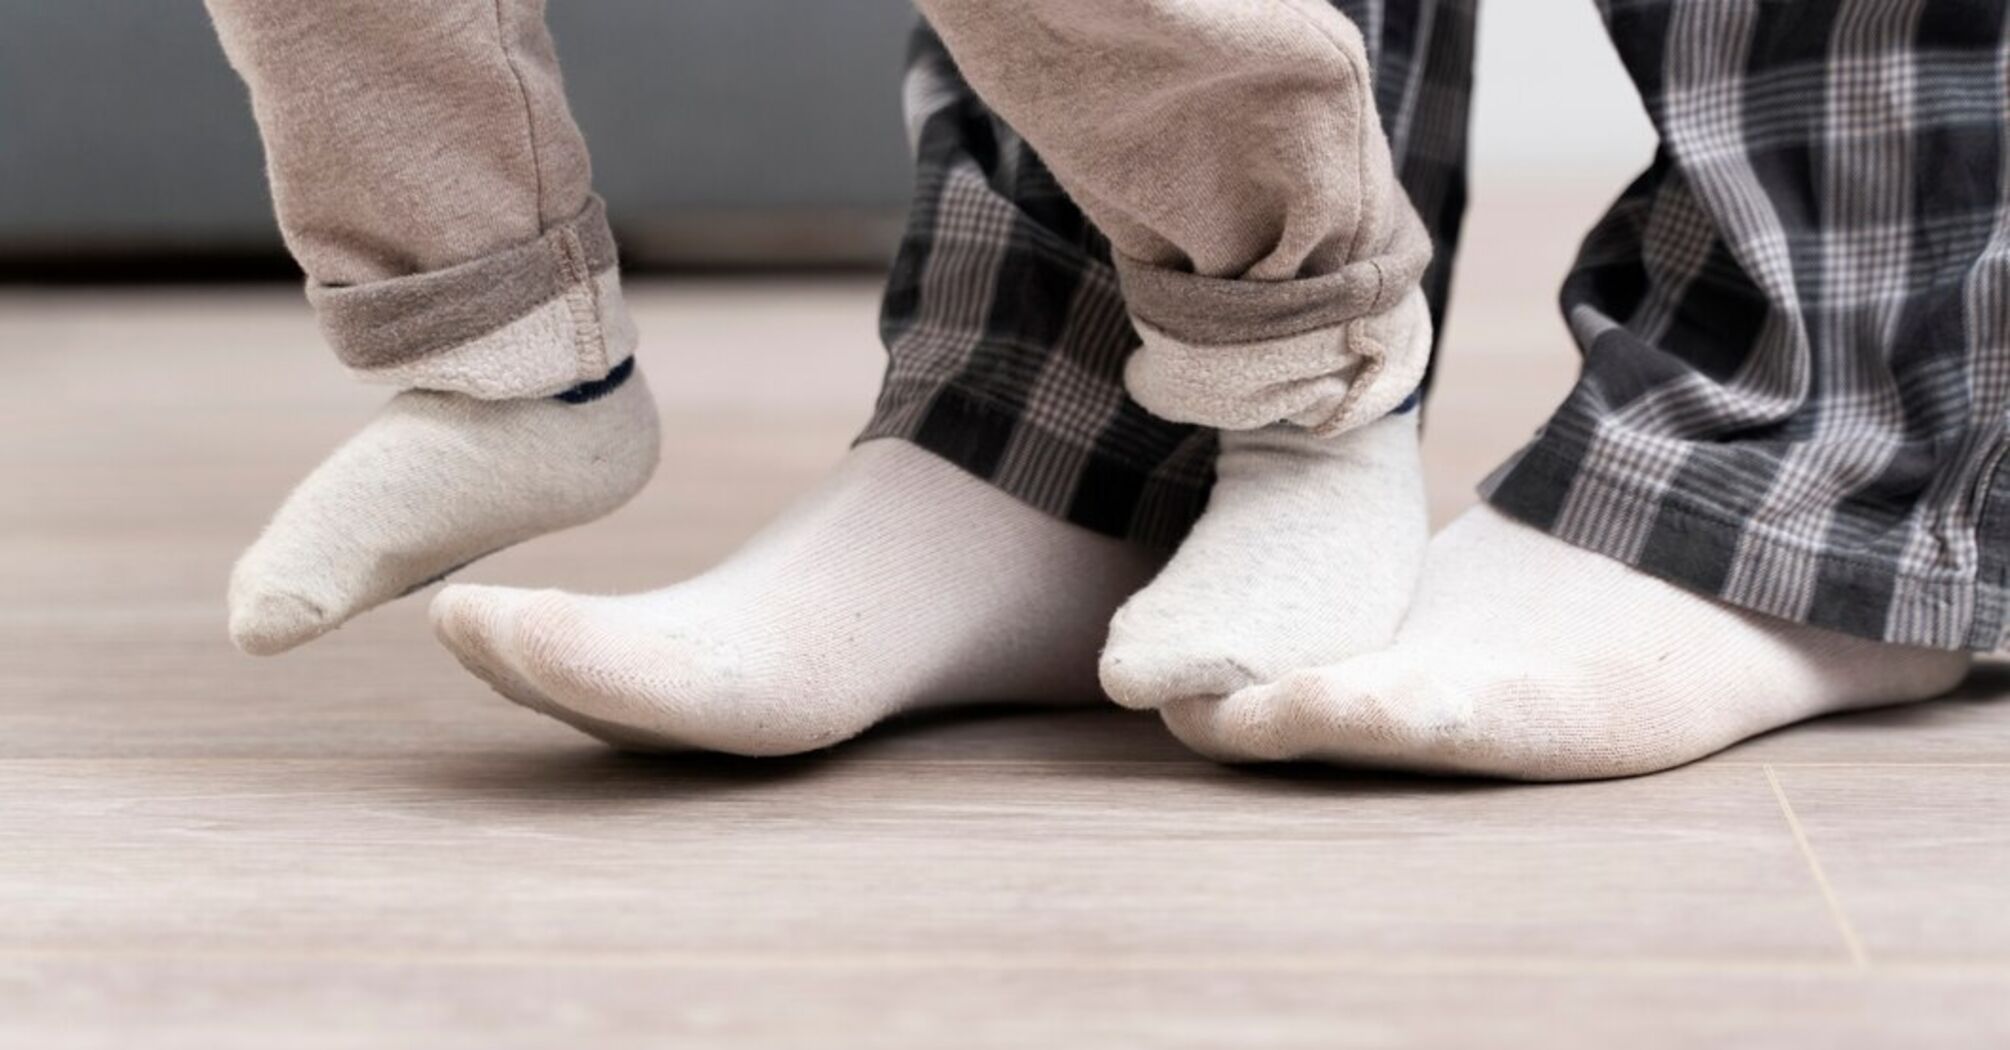 How to take proper care for white socks so that they do not lose their color: 5 effective tips